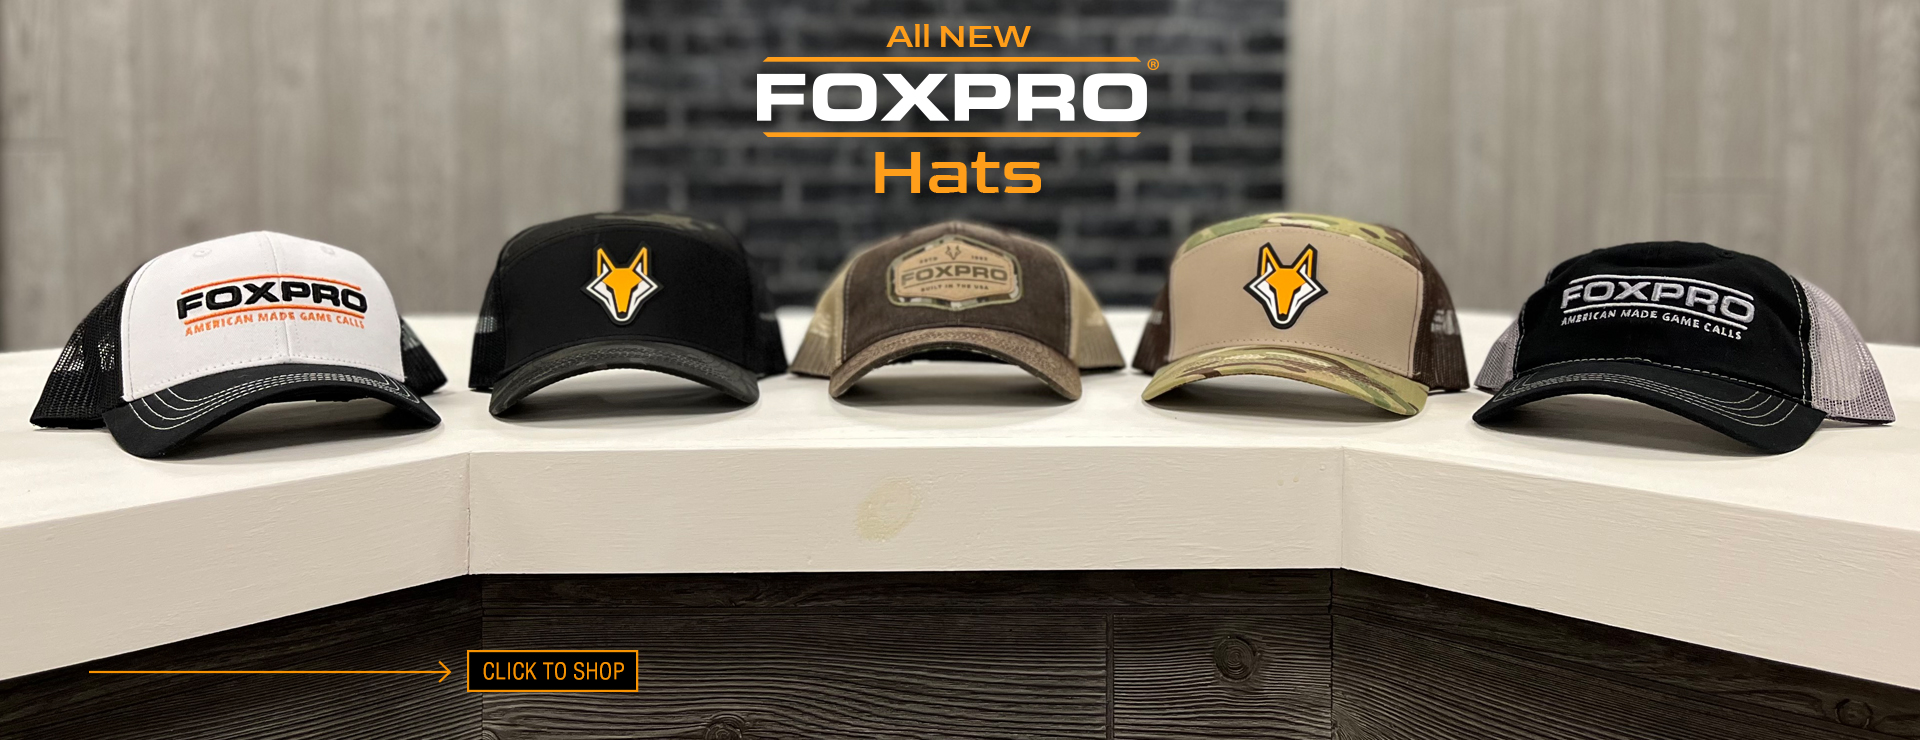 New FOXPRO hats now available. There are five hats featured, sitting on top of a counter top.